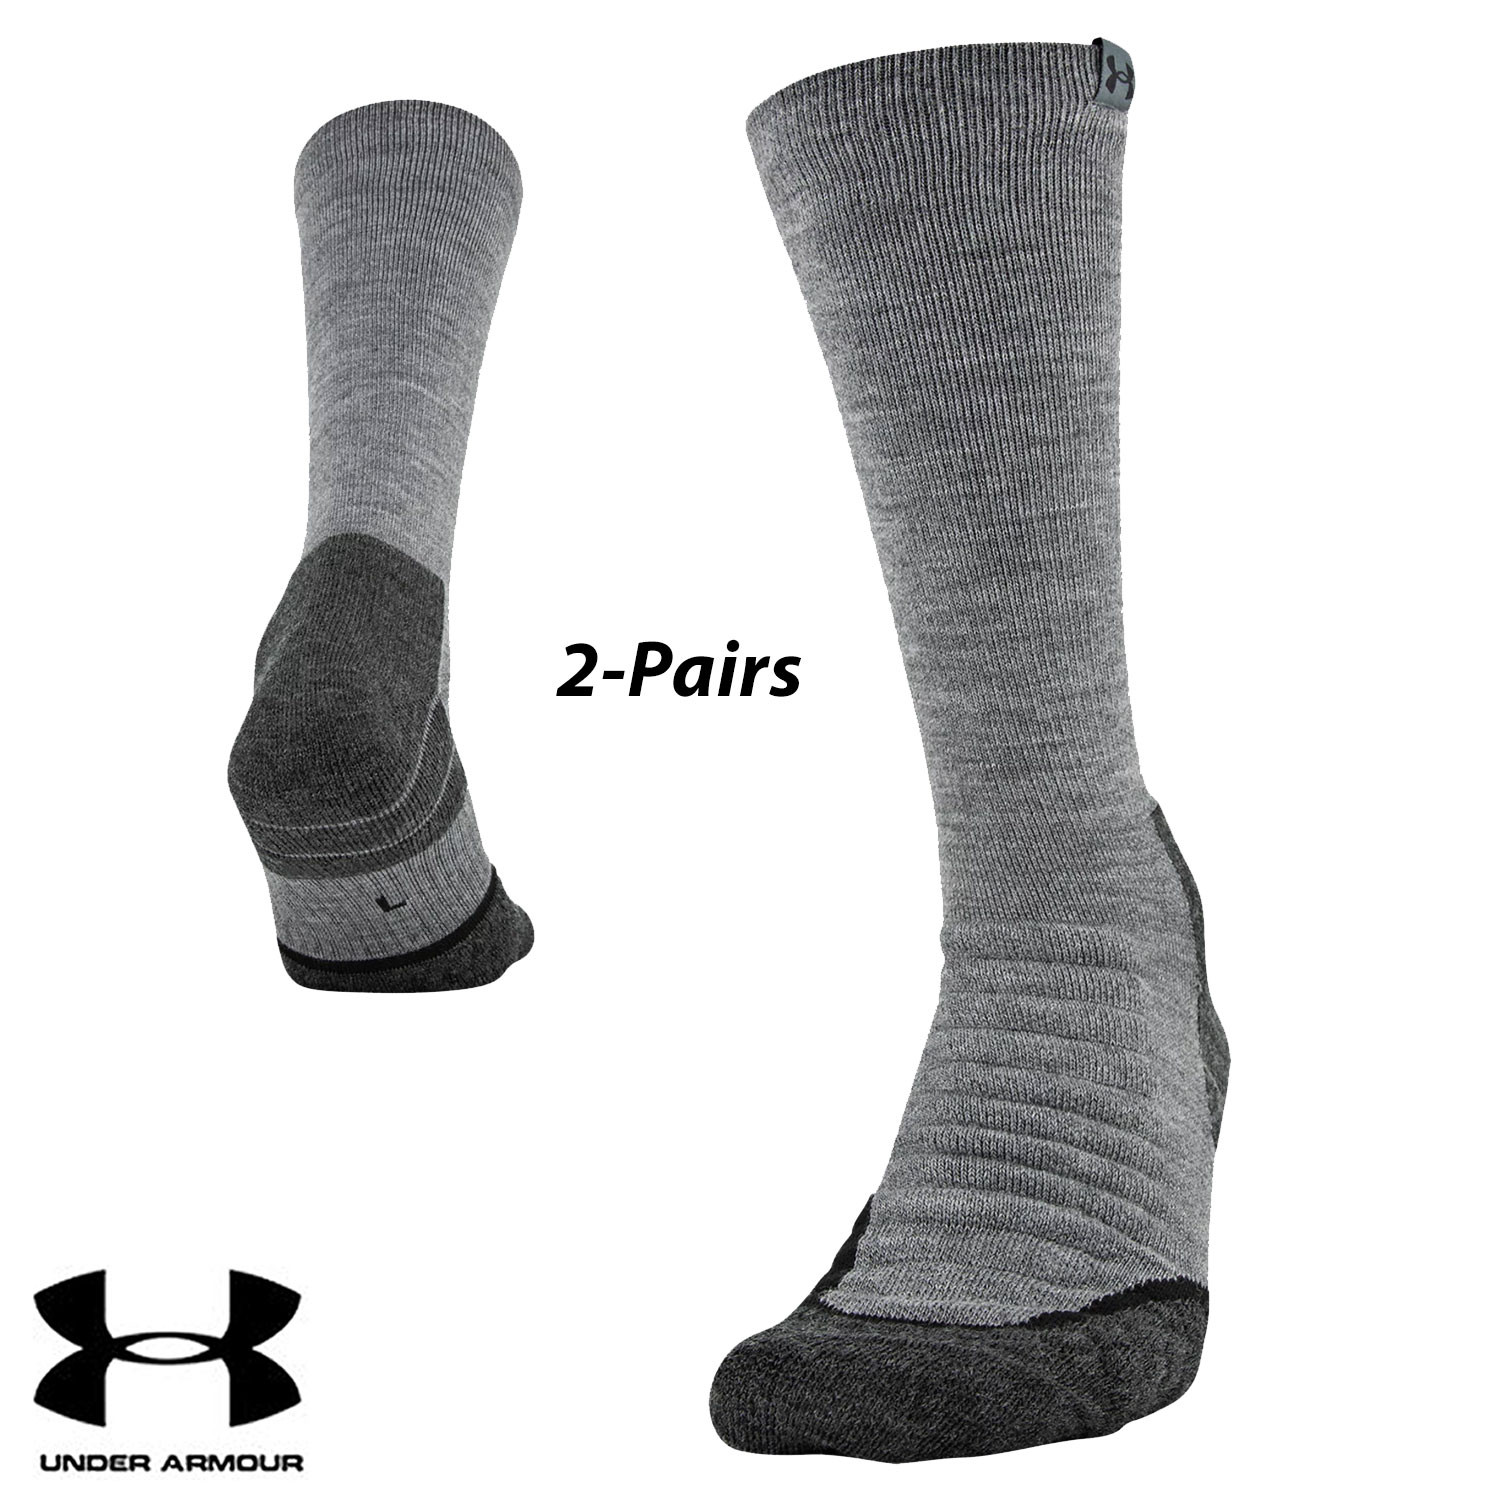 2-Pairs Under Armour Mens All Season Wicking Wool Boot Socks (size 9-12.5 anatomical fit) $14.99 + Free Shipping